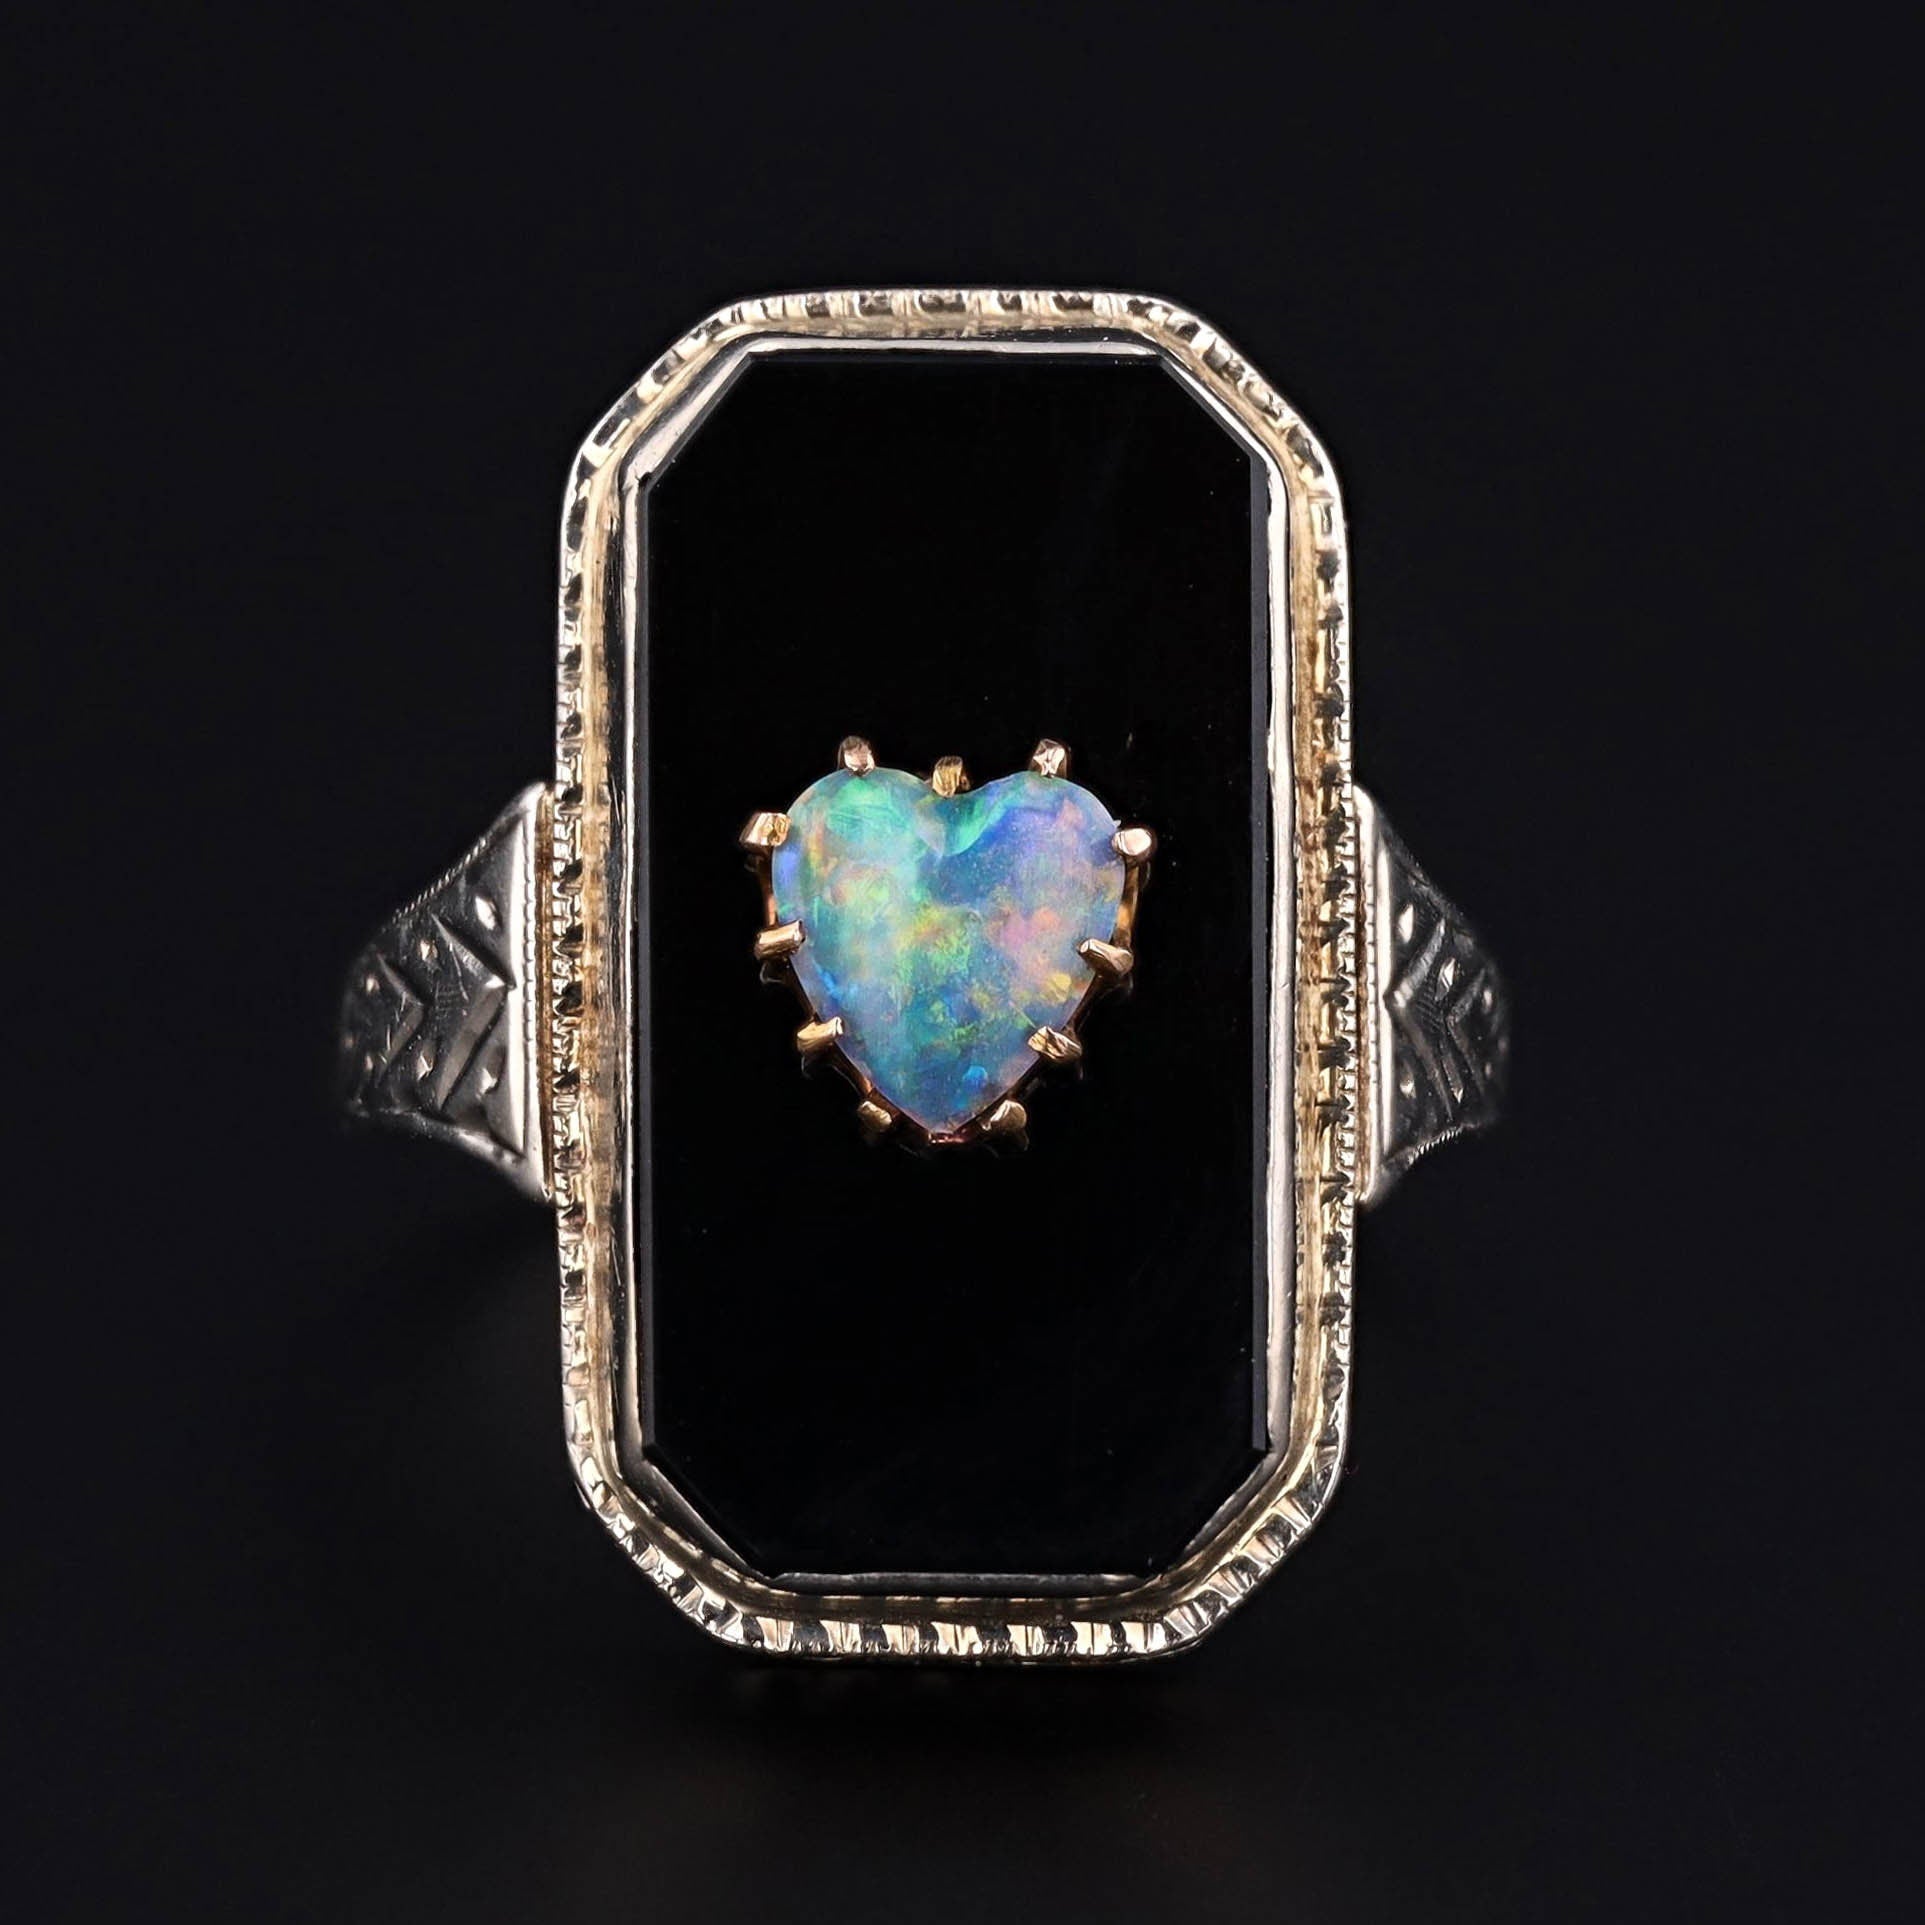 Vintage Onyx and Opal Heart Conversion Filigree Ring of 14k White Gold